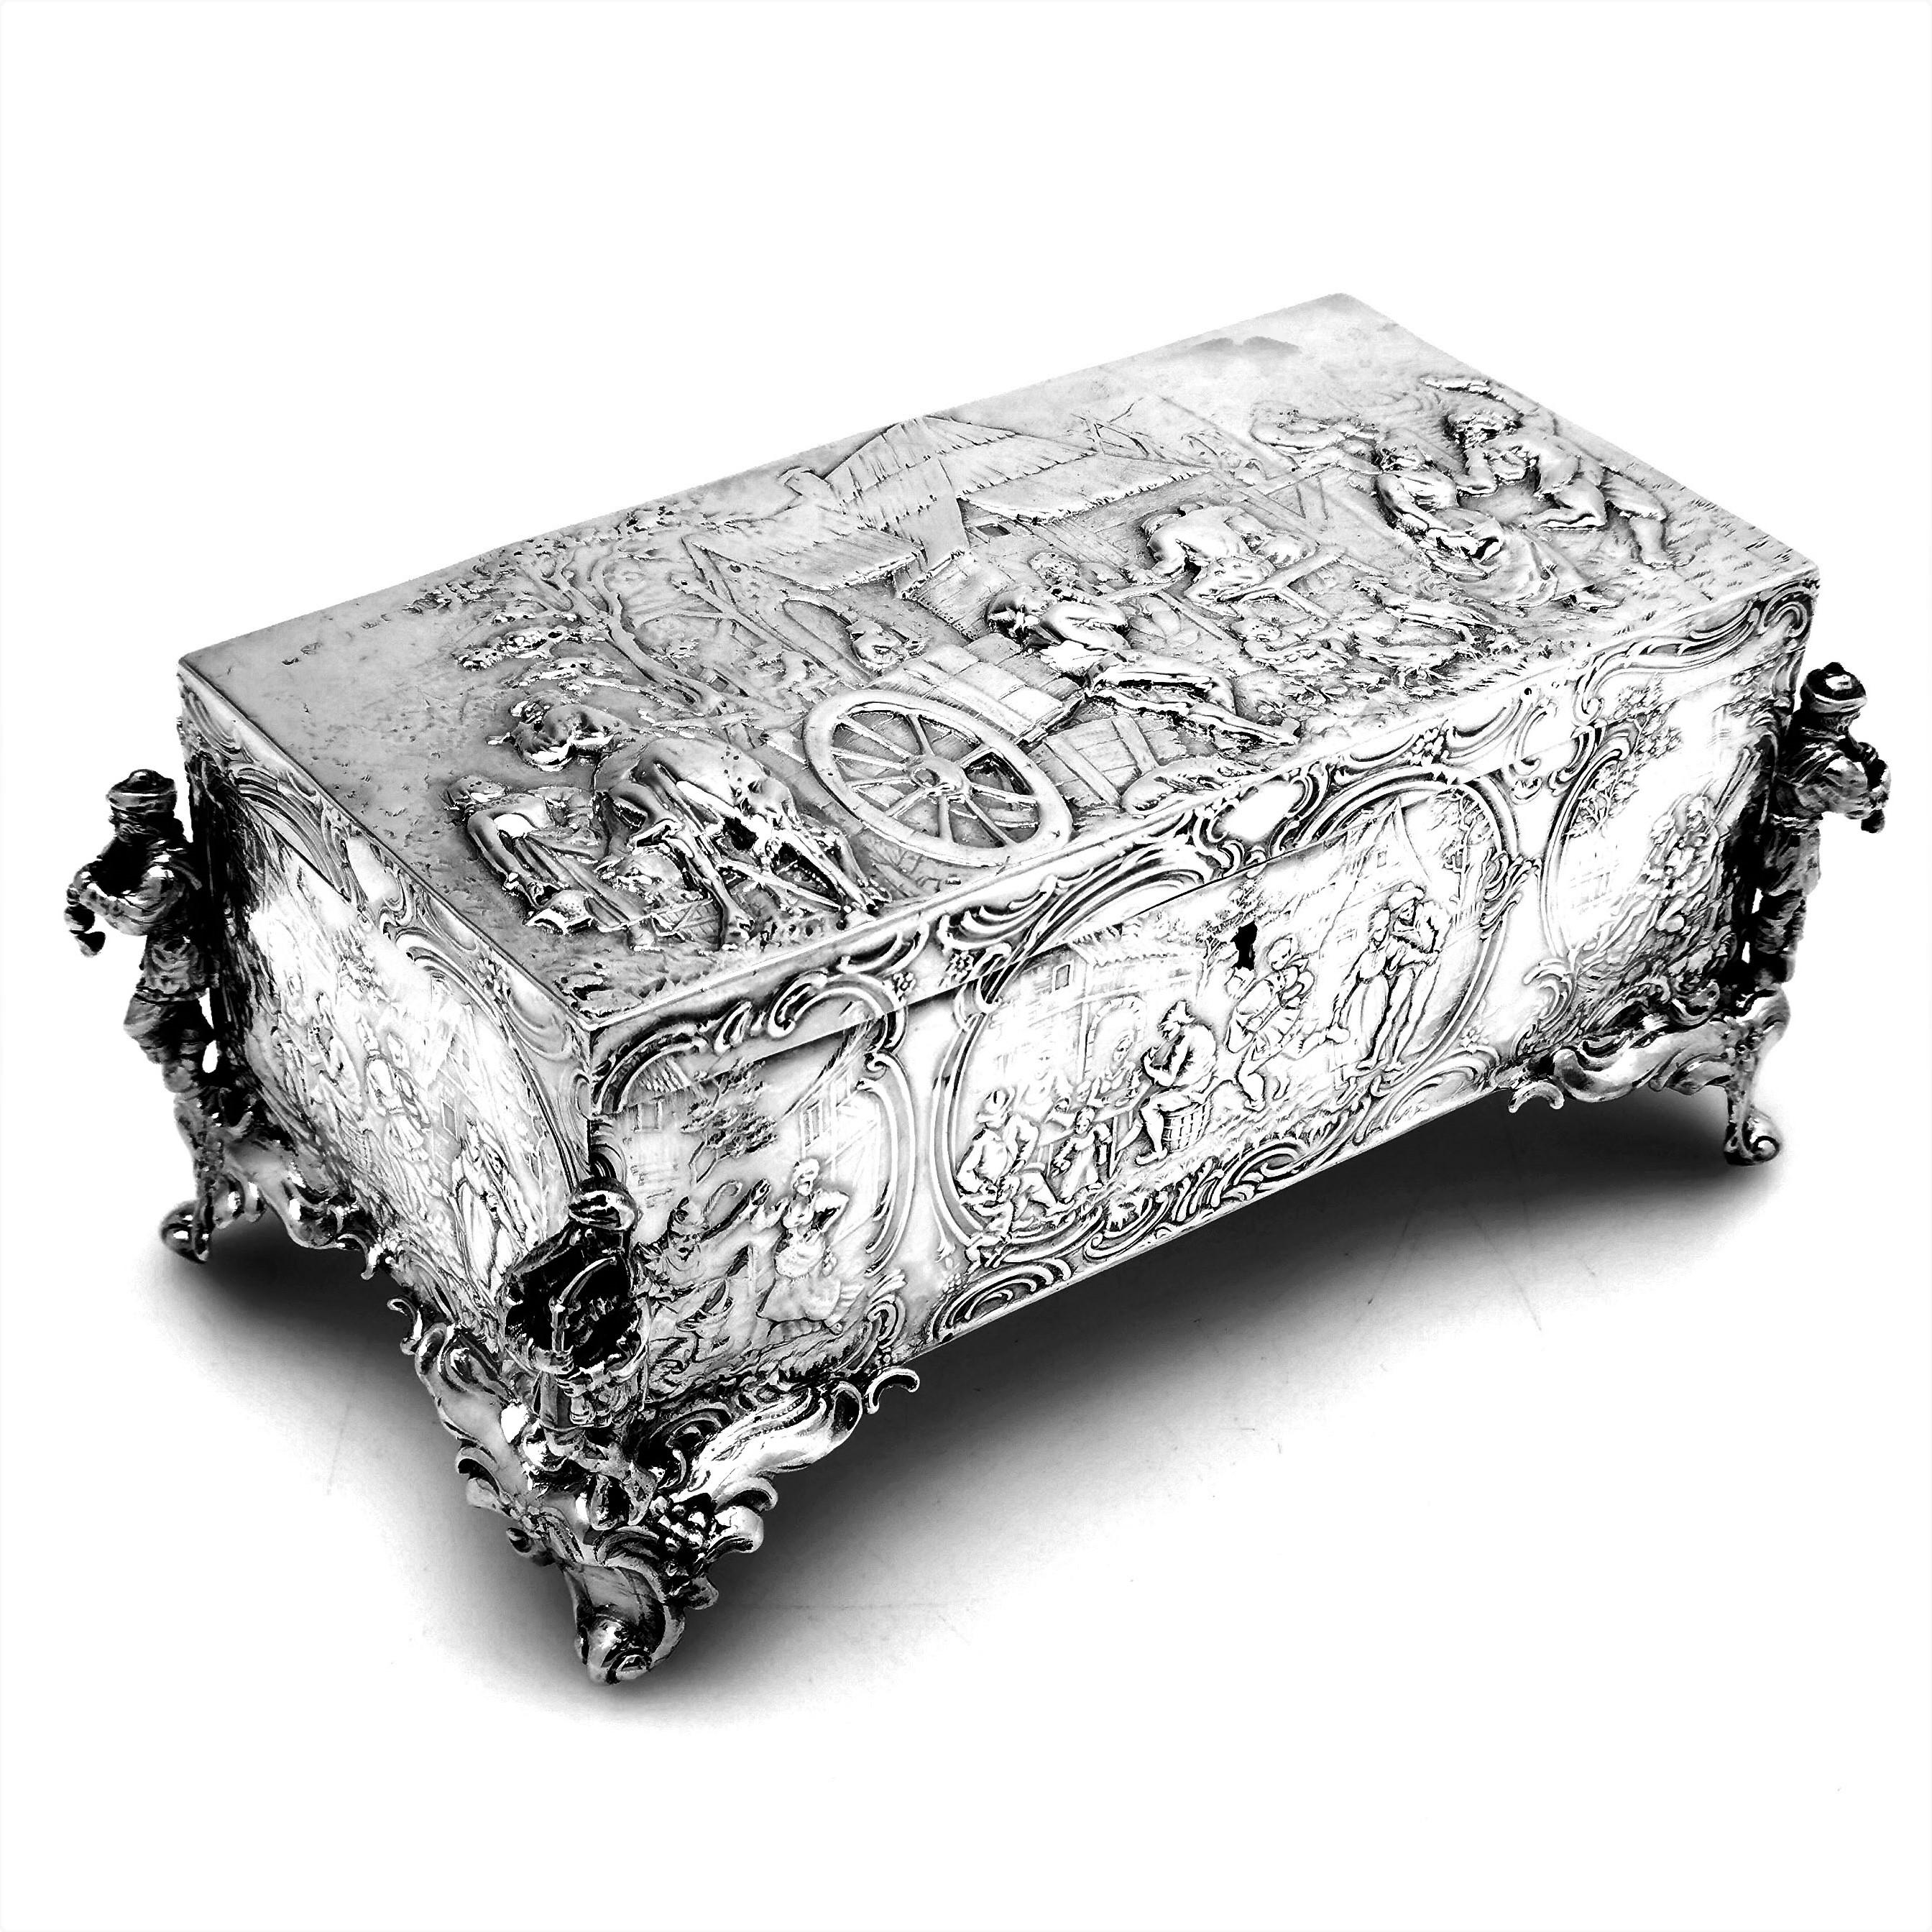 A lovely antique German silver Jewellery Box featuring beautiful chased designs on the lid and sides. The Box stands on four figural feet and is lightly gilded on the inside.

Made in Germany by Berthold Muller. English Import Marks for